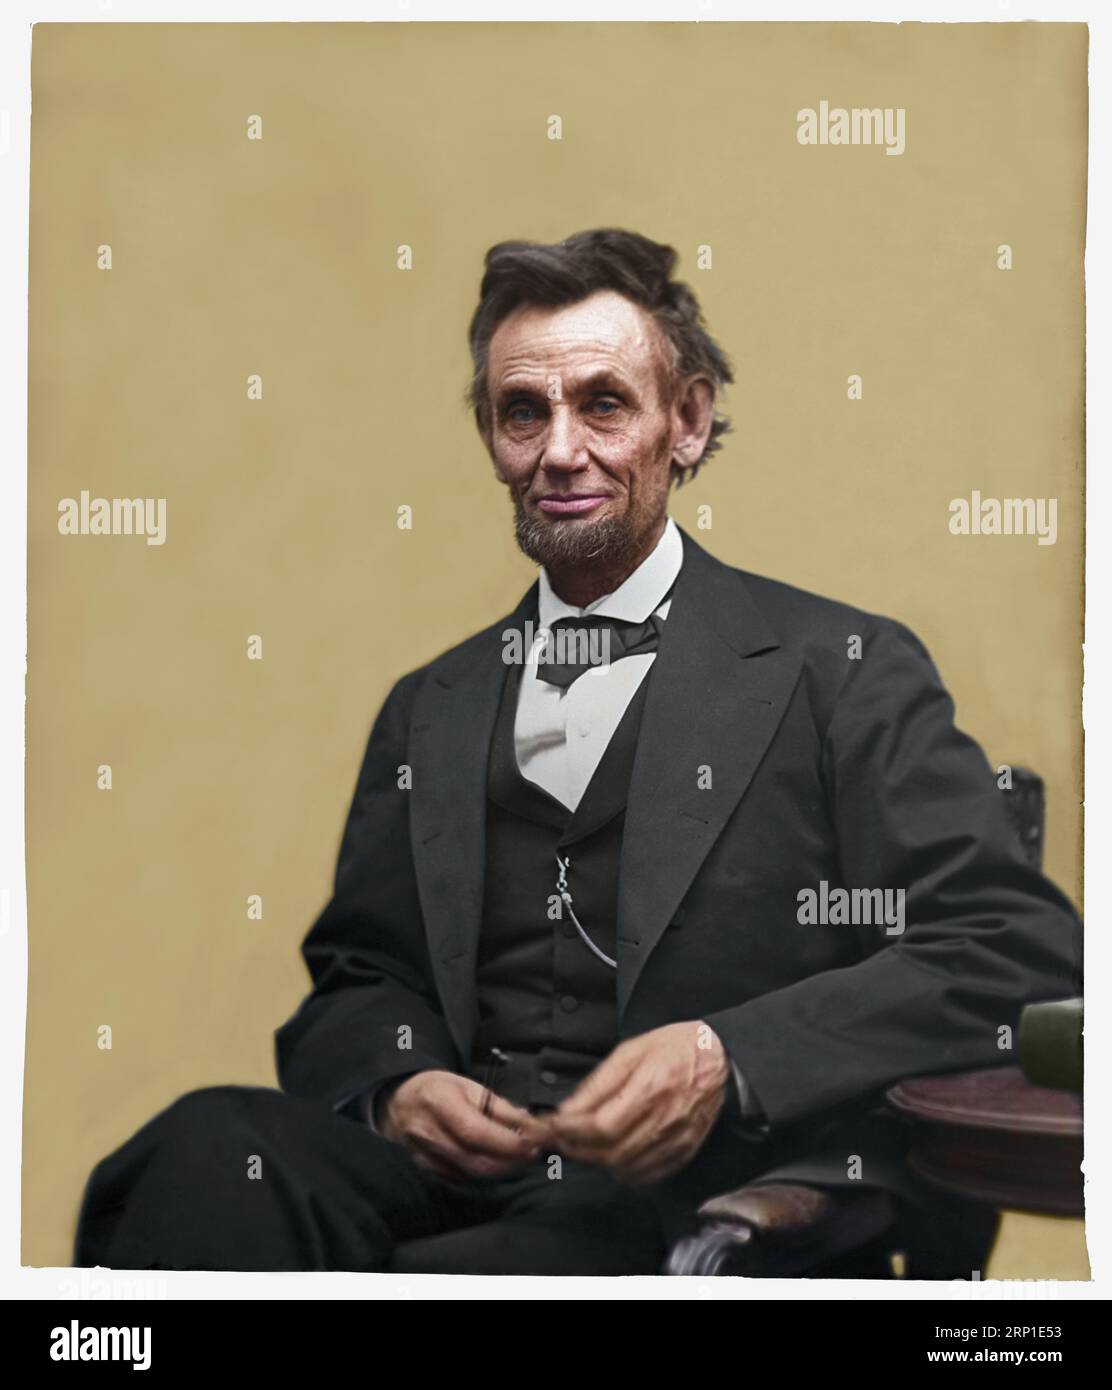 Abraham Lincoln, three-quarter length portrait, seated and holding his spectacles and a pencil. The photograph was created by Alexander Gardner on 5th Stock Photo